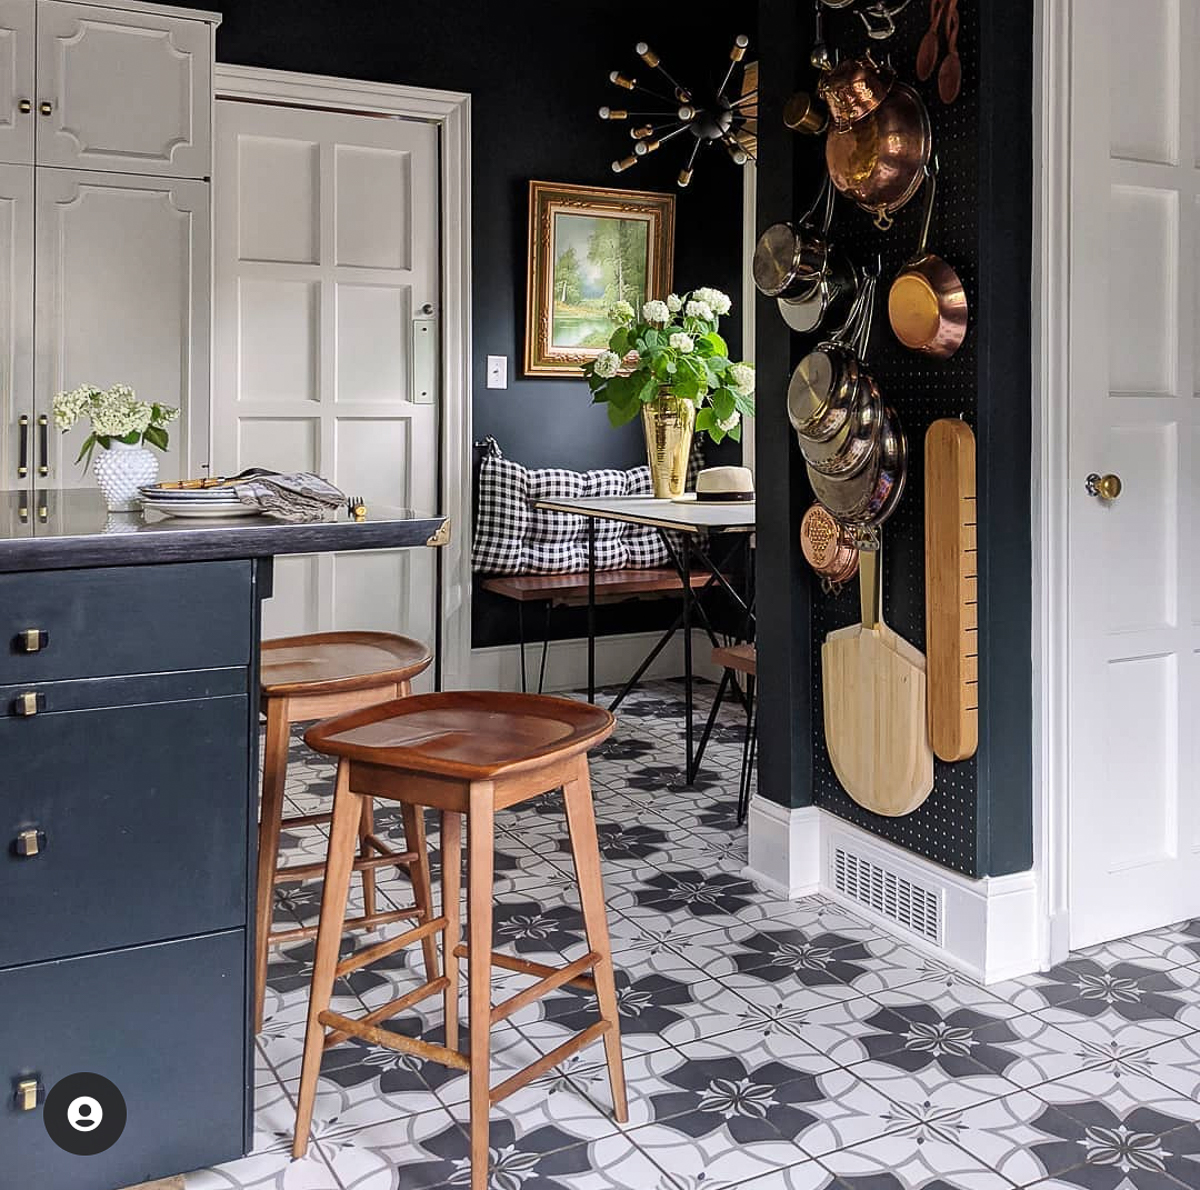 Tour this vintage modern home with a beautifully renovated kitchen with dramatic dark blue walls and copper pot collection